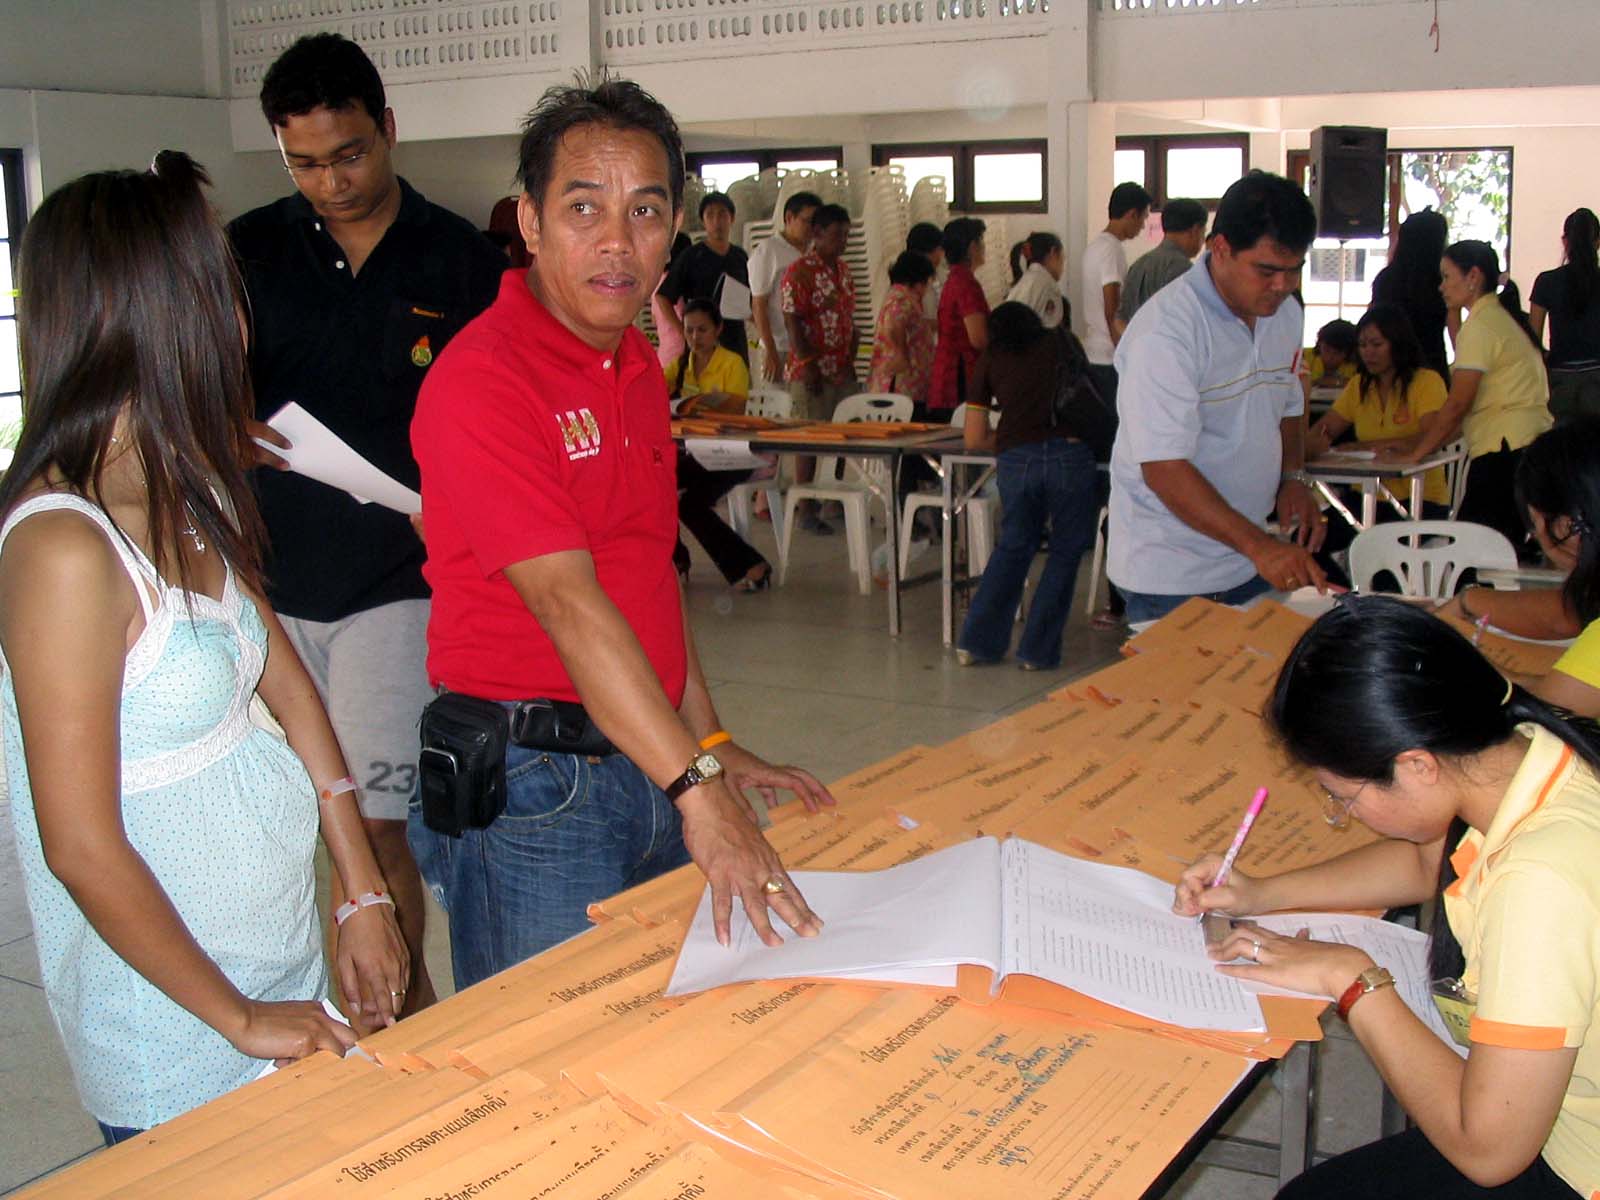 Michael H. Nelson, Chachoengsao election coverage, Thailand, December 2007